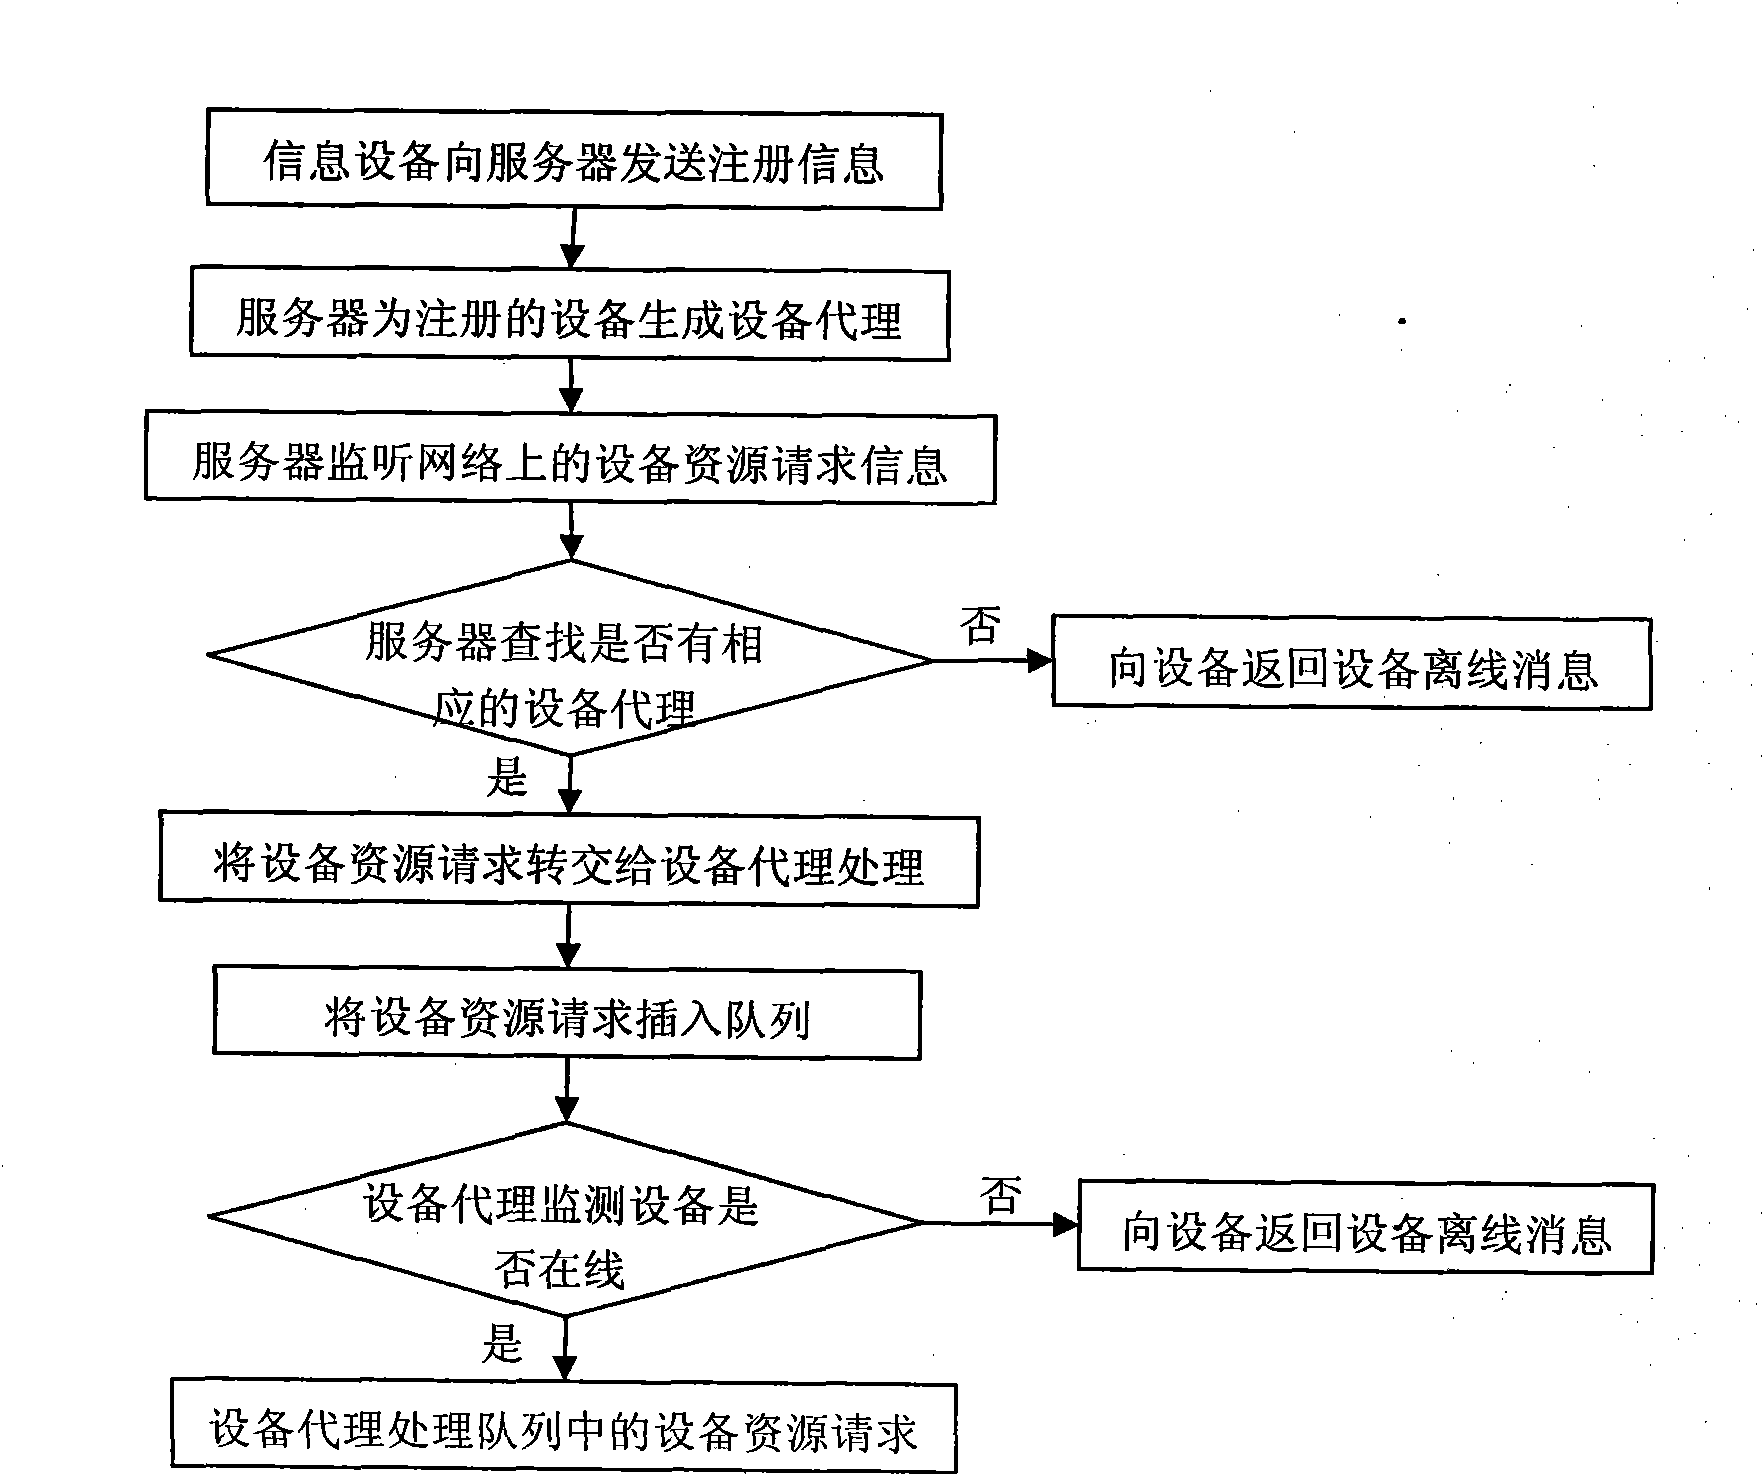 Method for sharing information equipment resources by utilizing equipment agent system